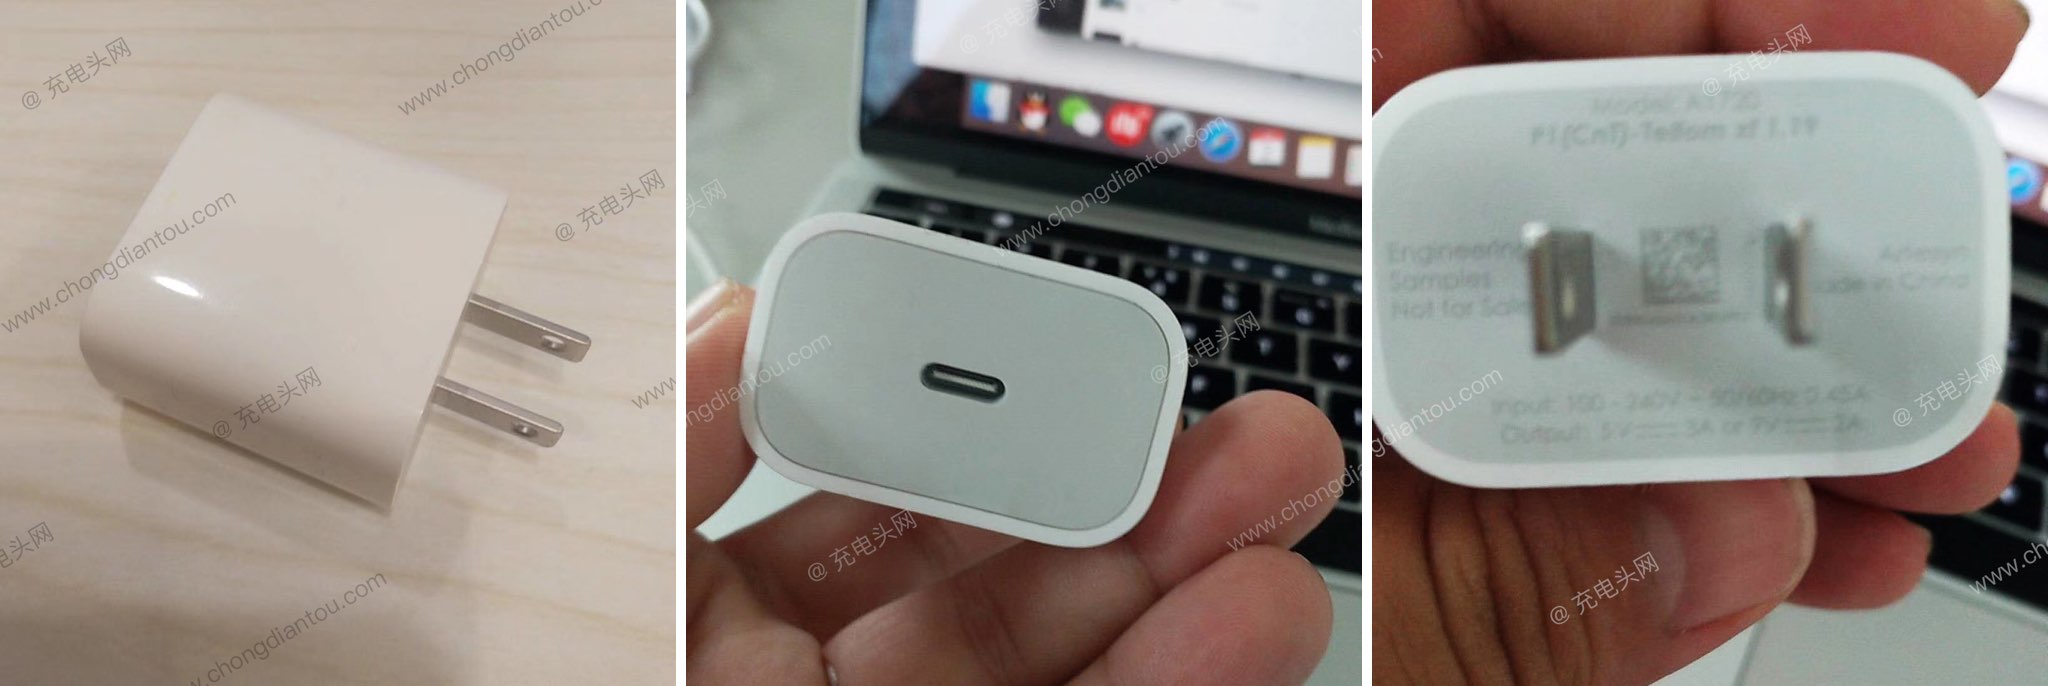 A leaked image showing off an engineering prototype version of Apple's rumored 18-watt USB-C power adapter for 2018 iPhones